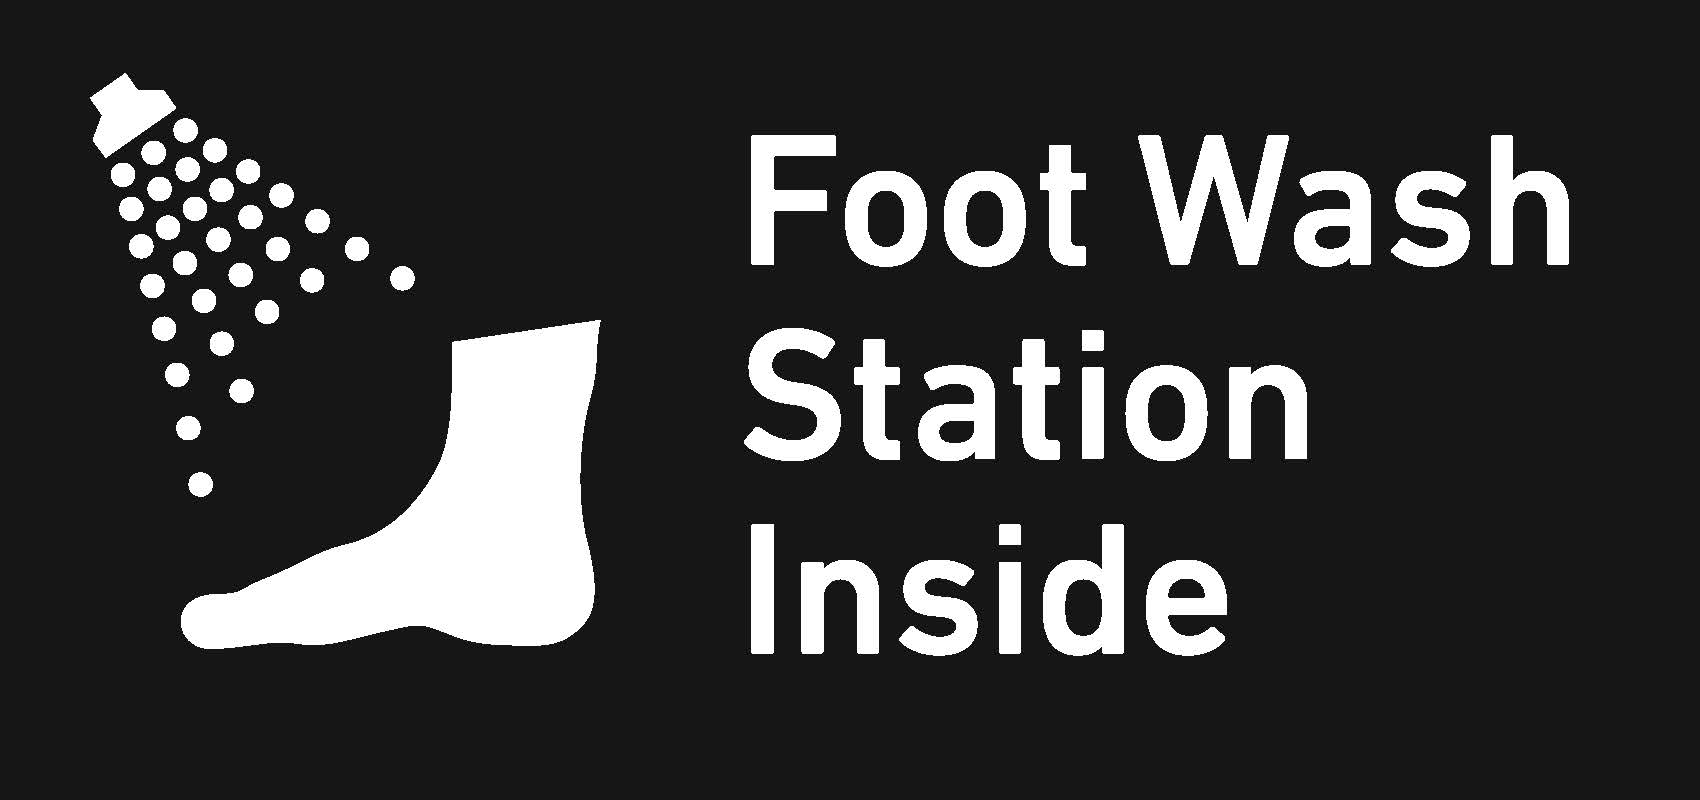 foot with water spray symbol, Foot Wash Station Inside